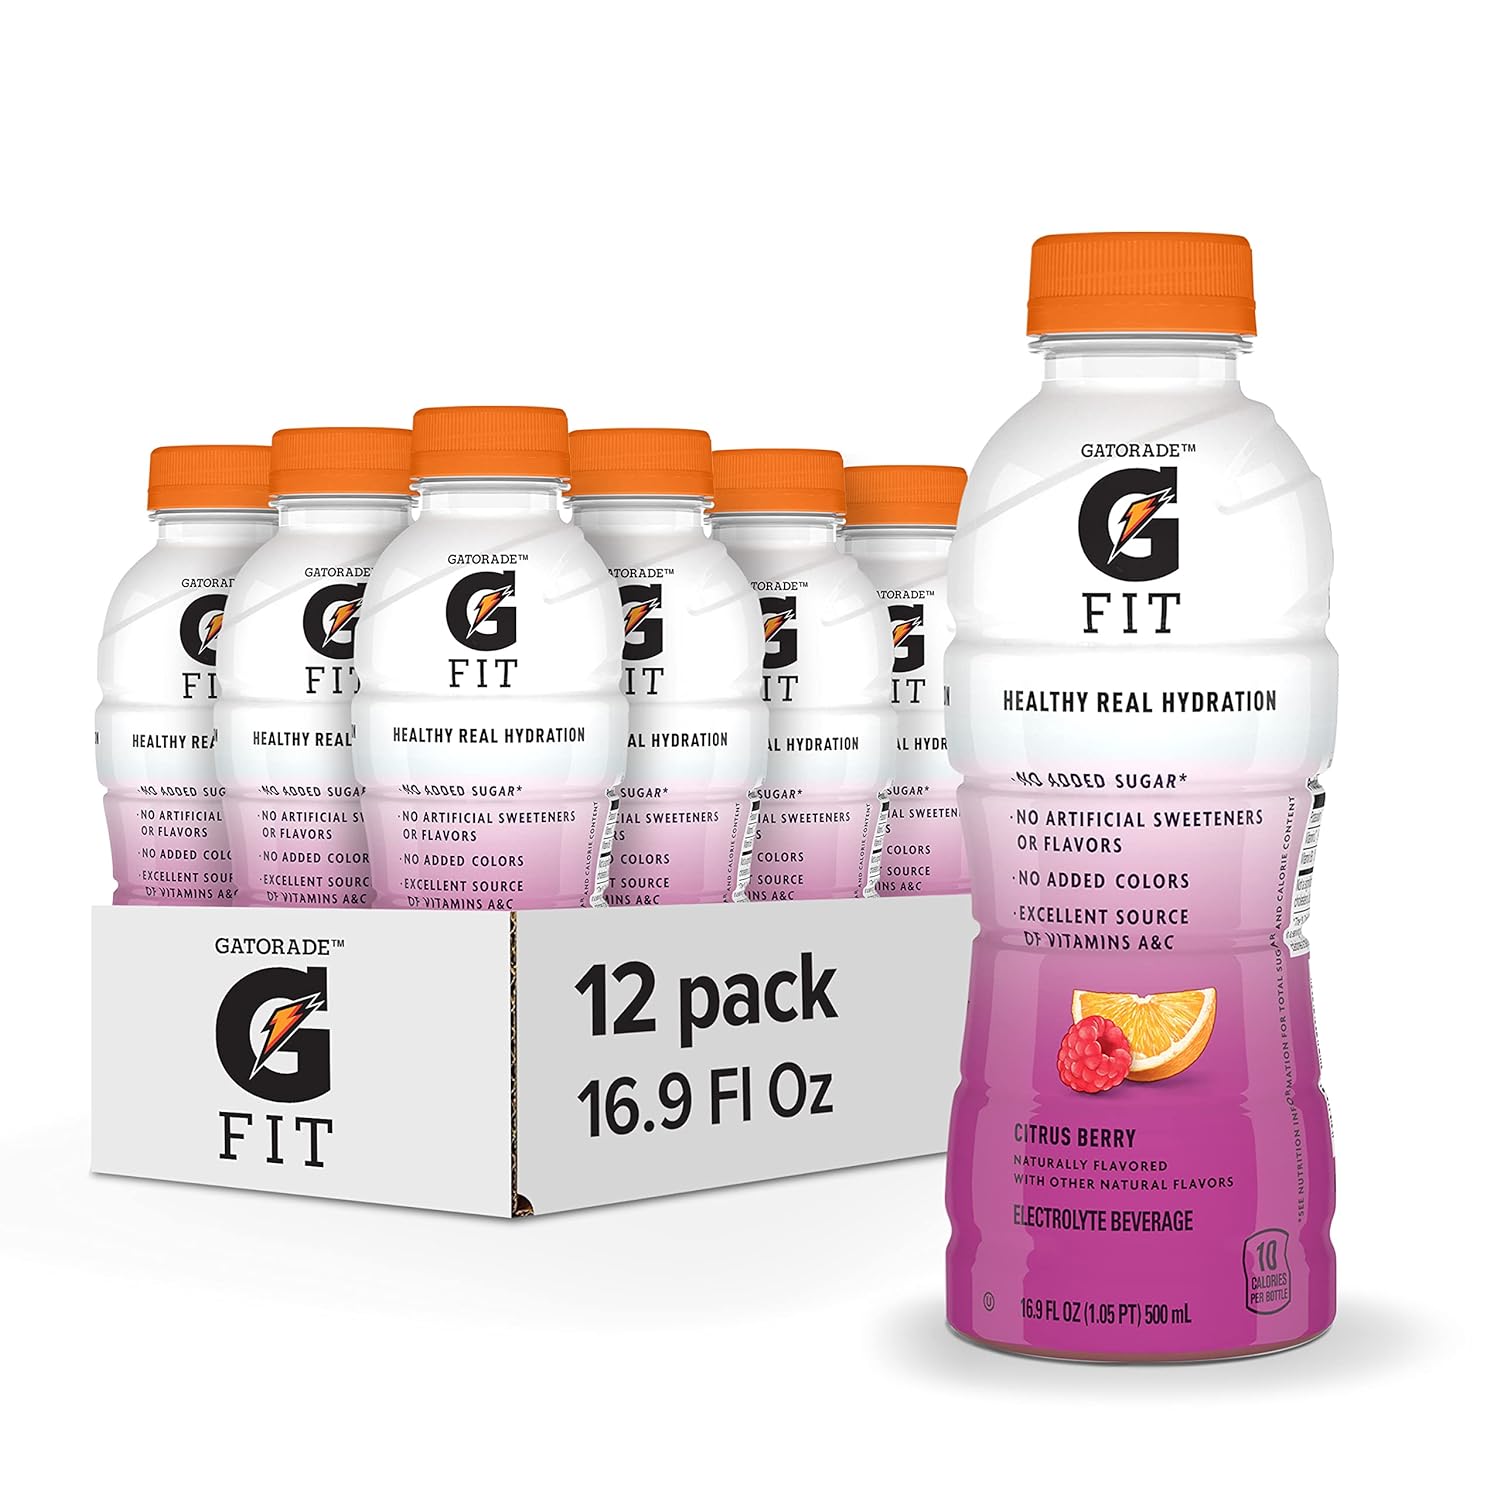 17-refreshing-facts-about-gatorade-fit-you-didnt-know